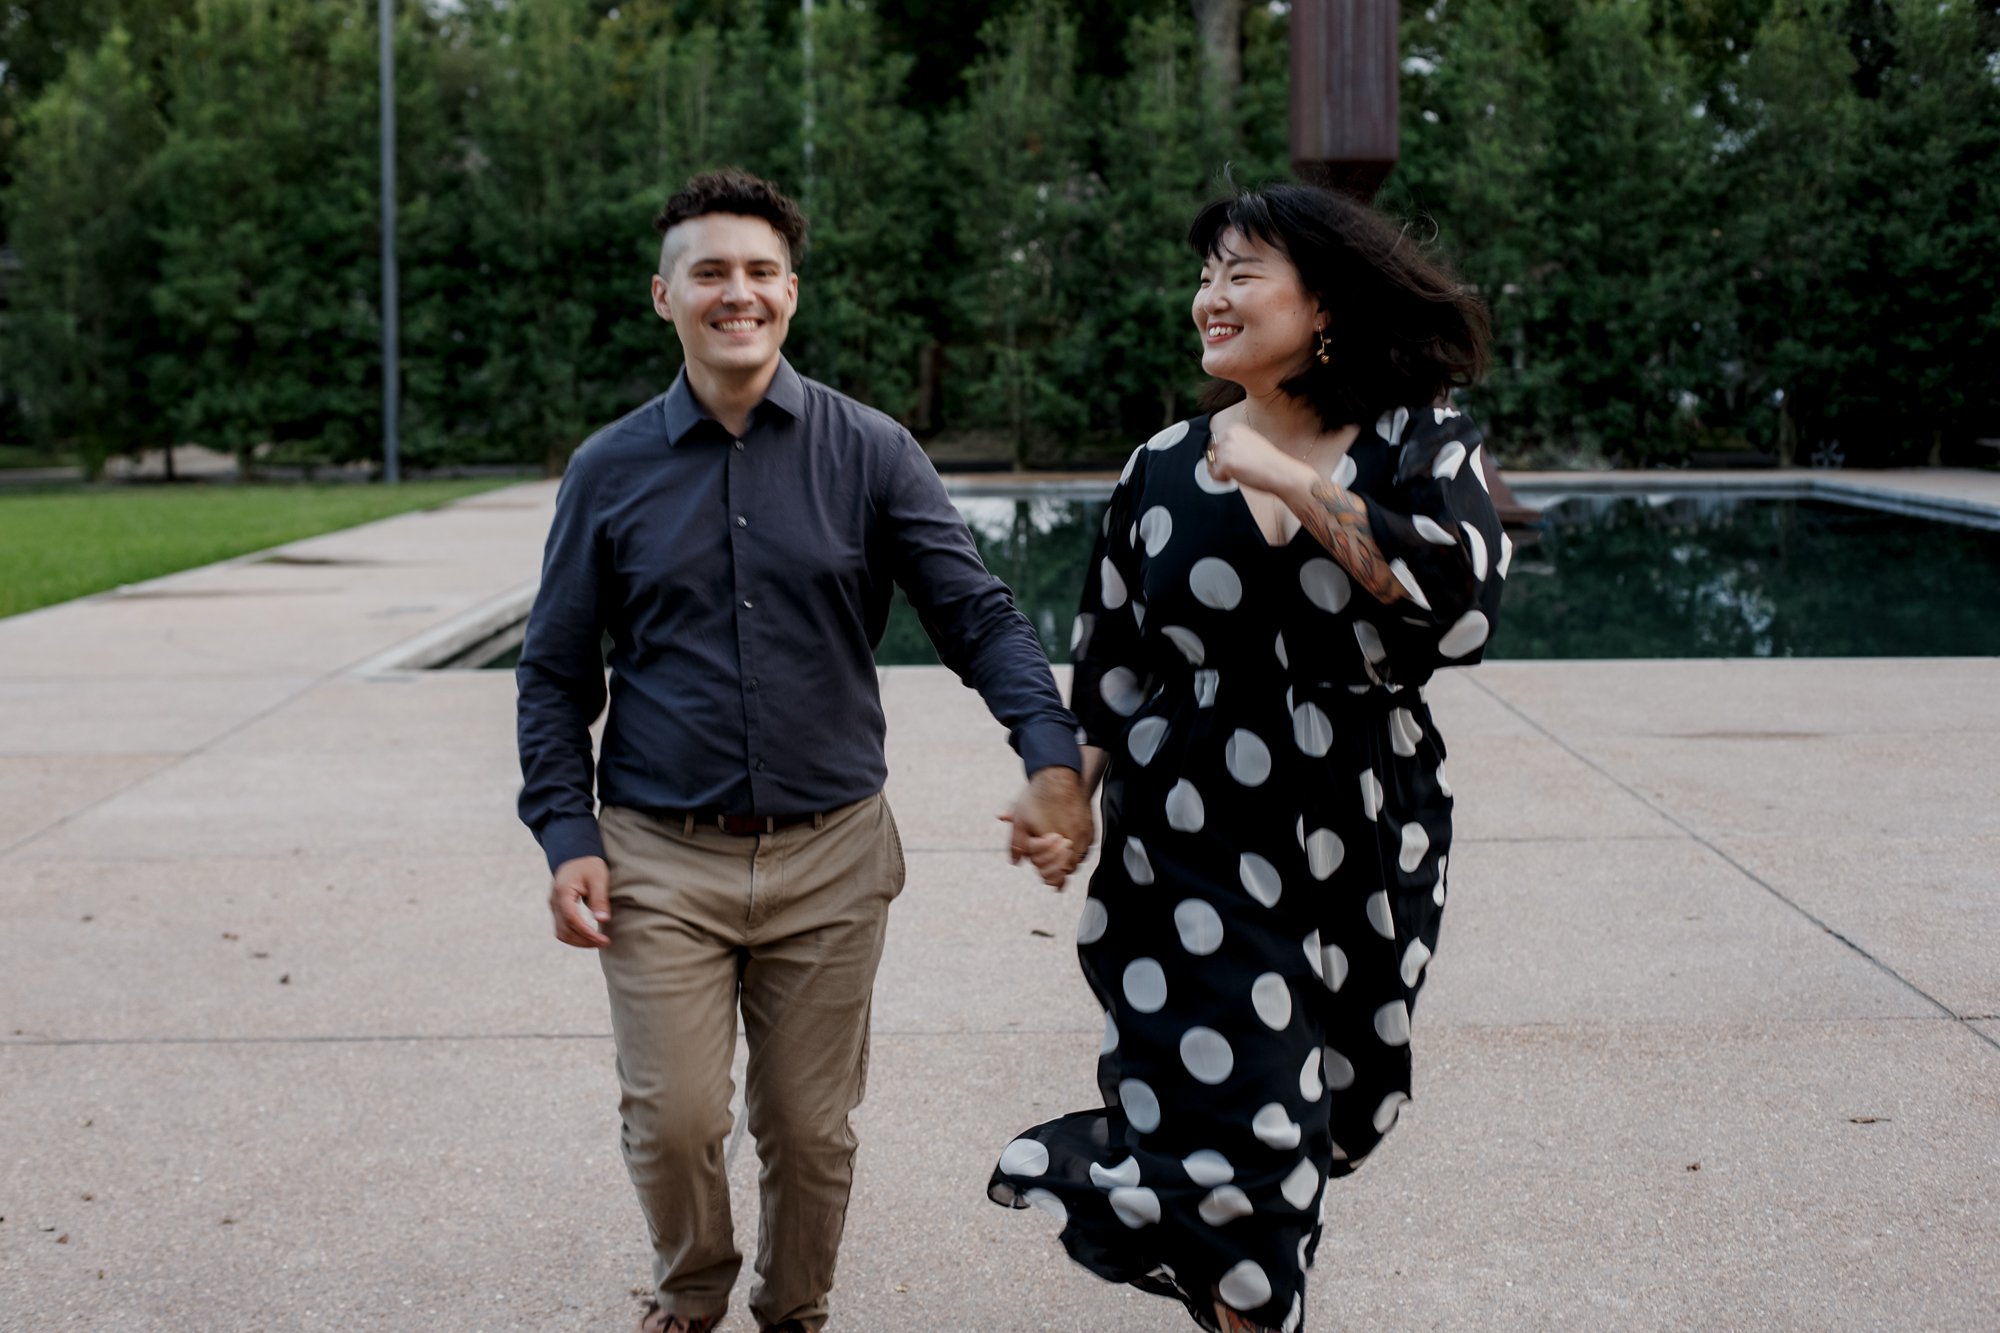 Couple runs laughing. Stylish Polka Dot Dress Engagement Photo Session by Rothko Chapel Sculpture